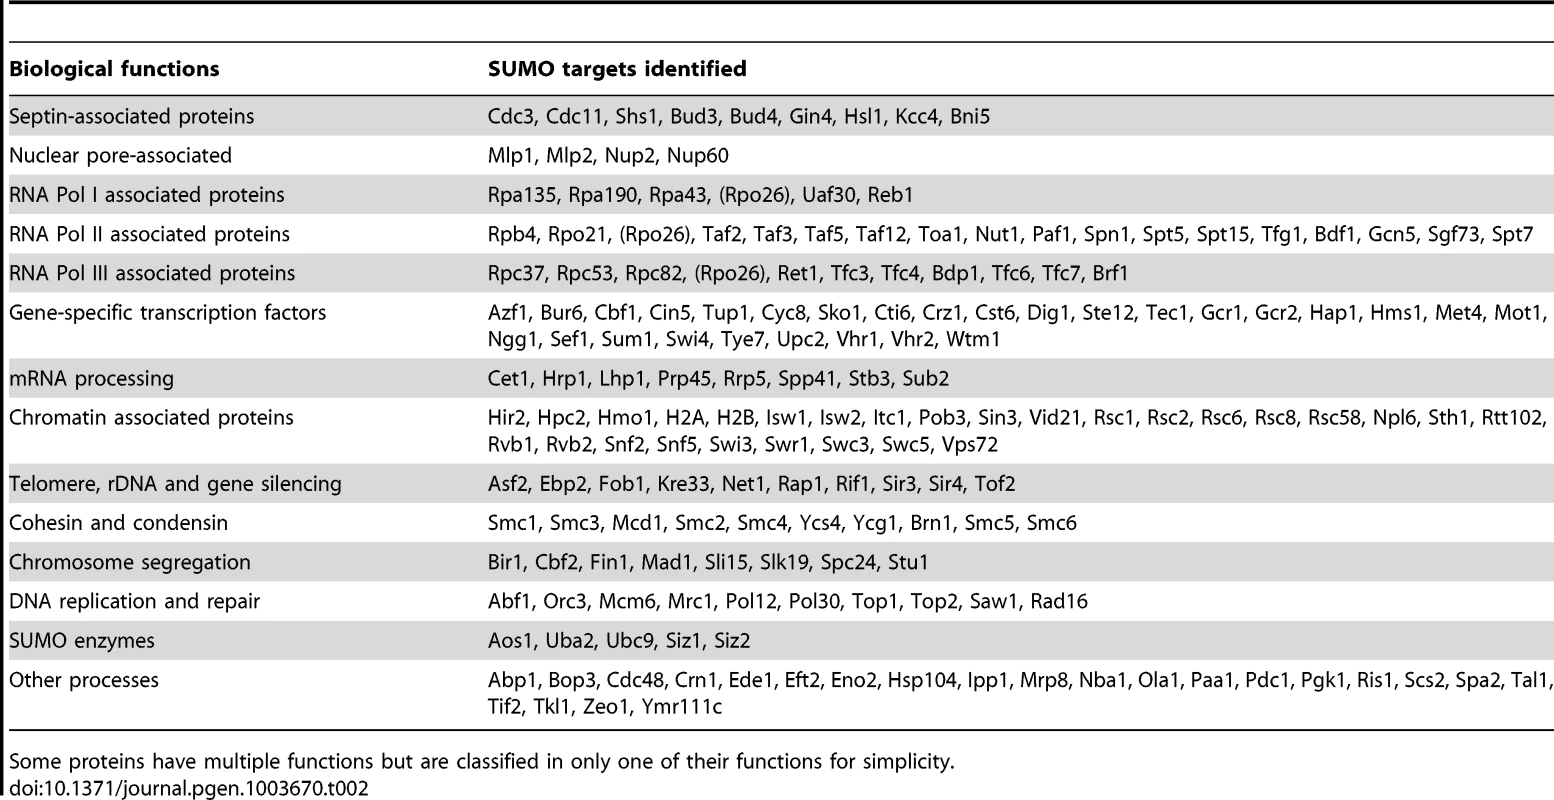 A summary of 176 sumoylated proteins identified from two replicate MS experiments (see text for details).